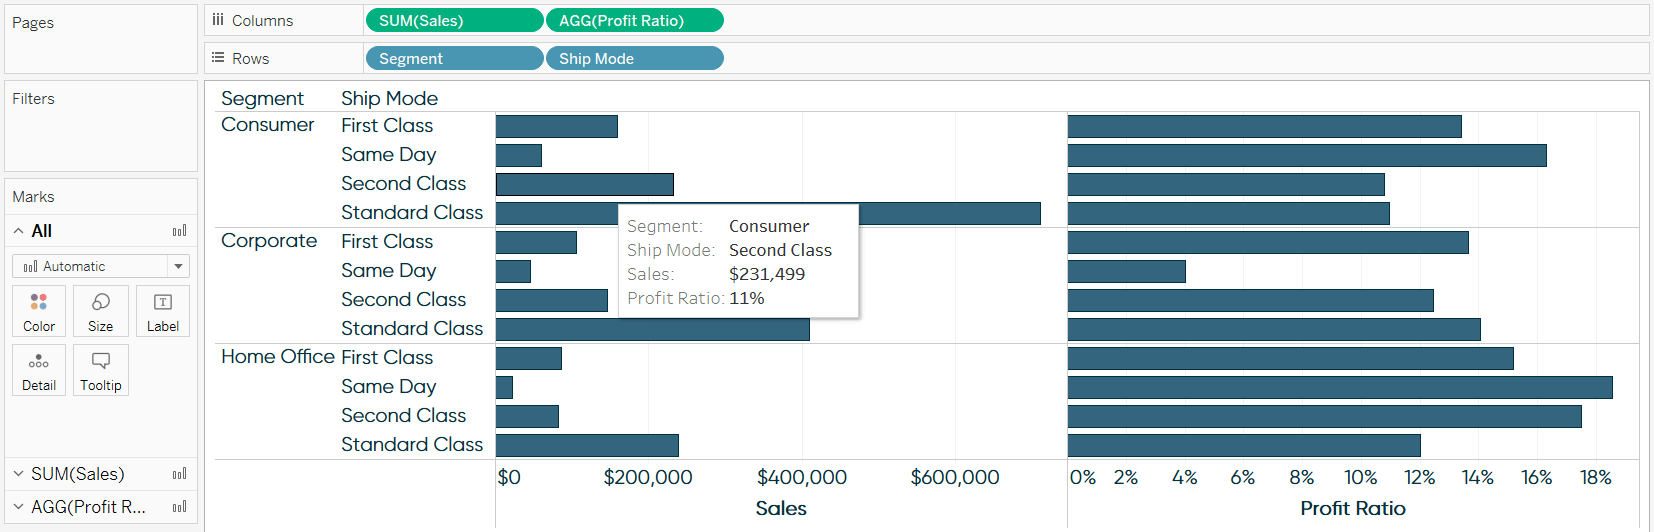 Tableau Sales and Profit Ratio by Segment and Ship Mode Tooltip